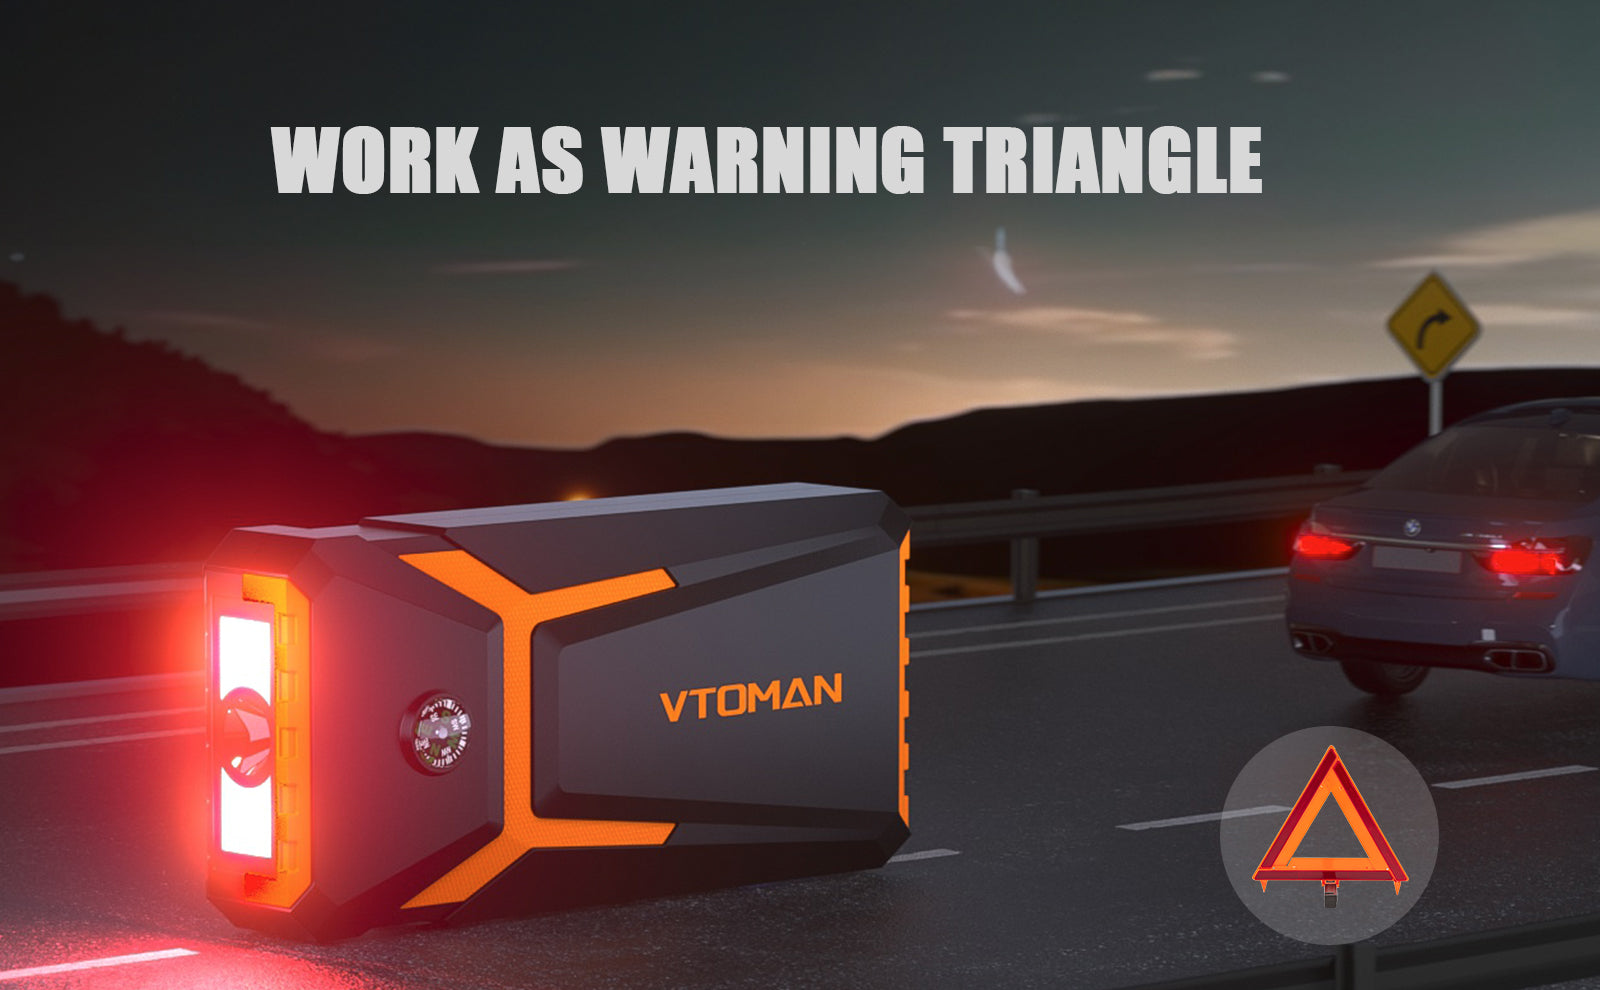 Equipped with red emergency lights, the V8 Pro serves as a warning triangle during vehicle breakdowns, effectively alerting passing vehicles.